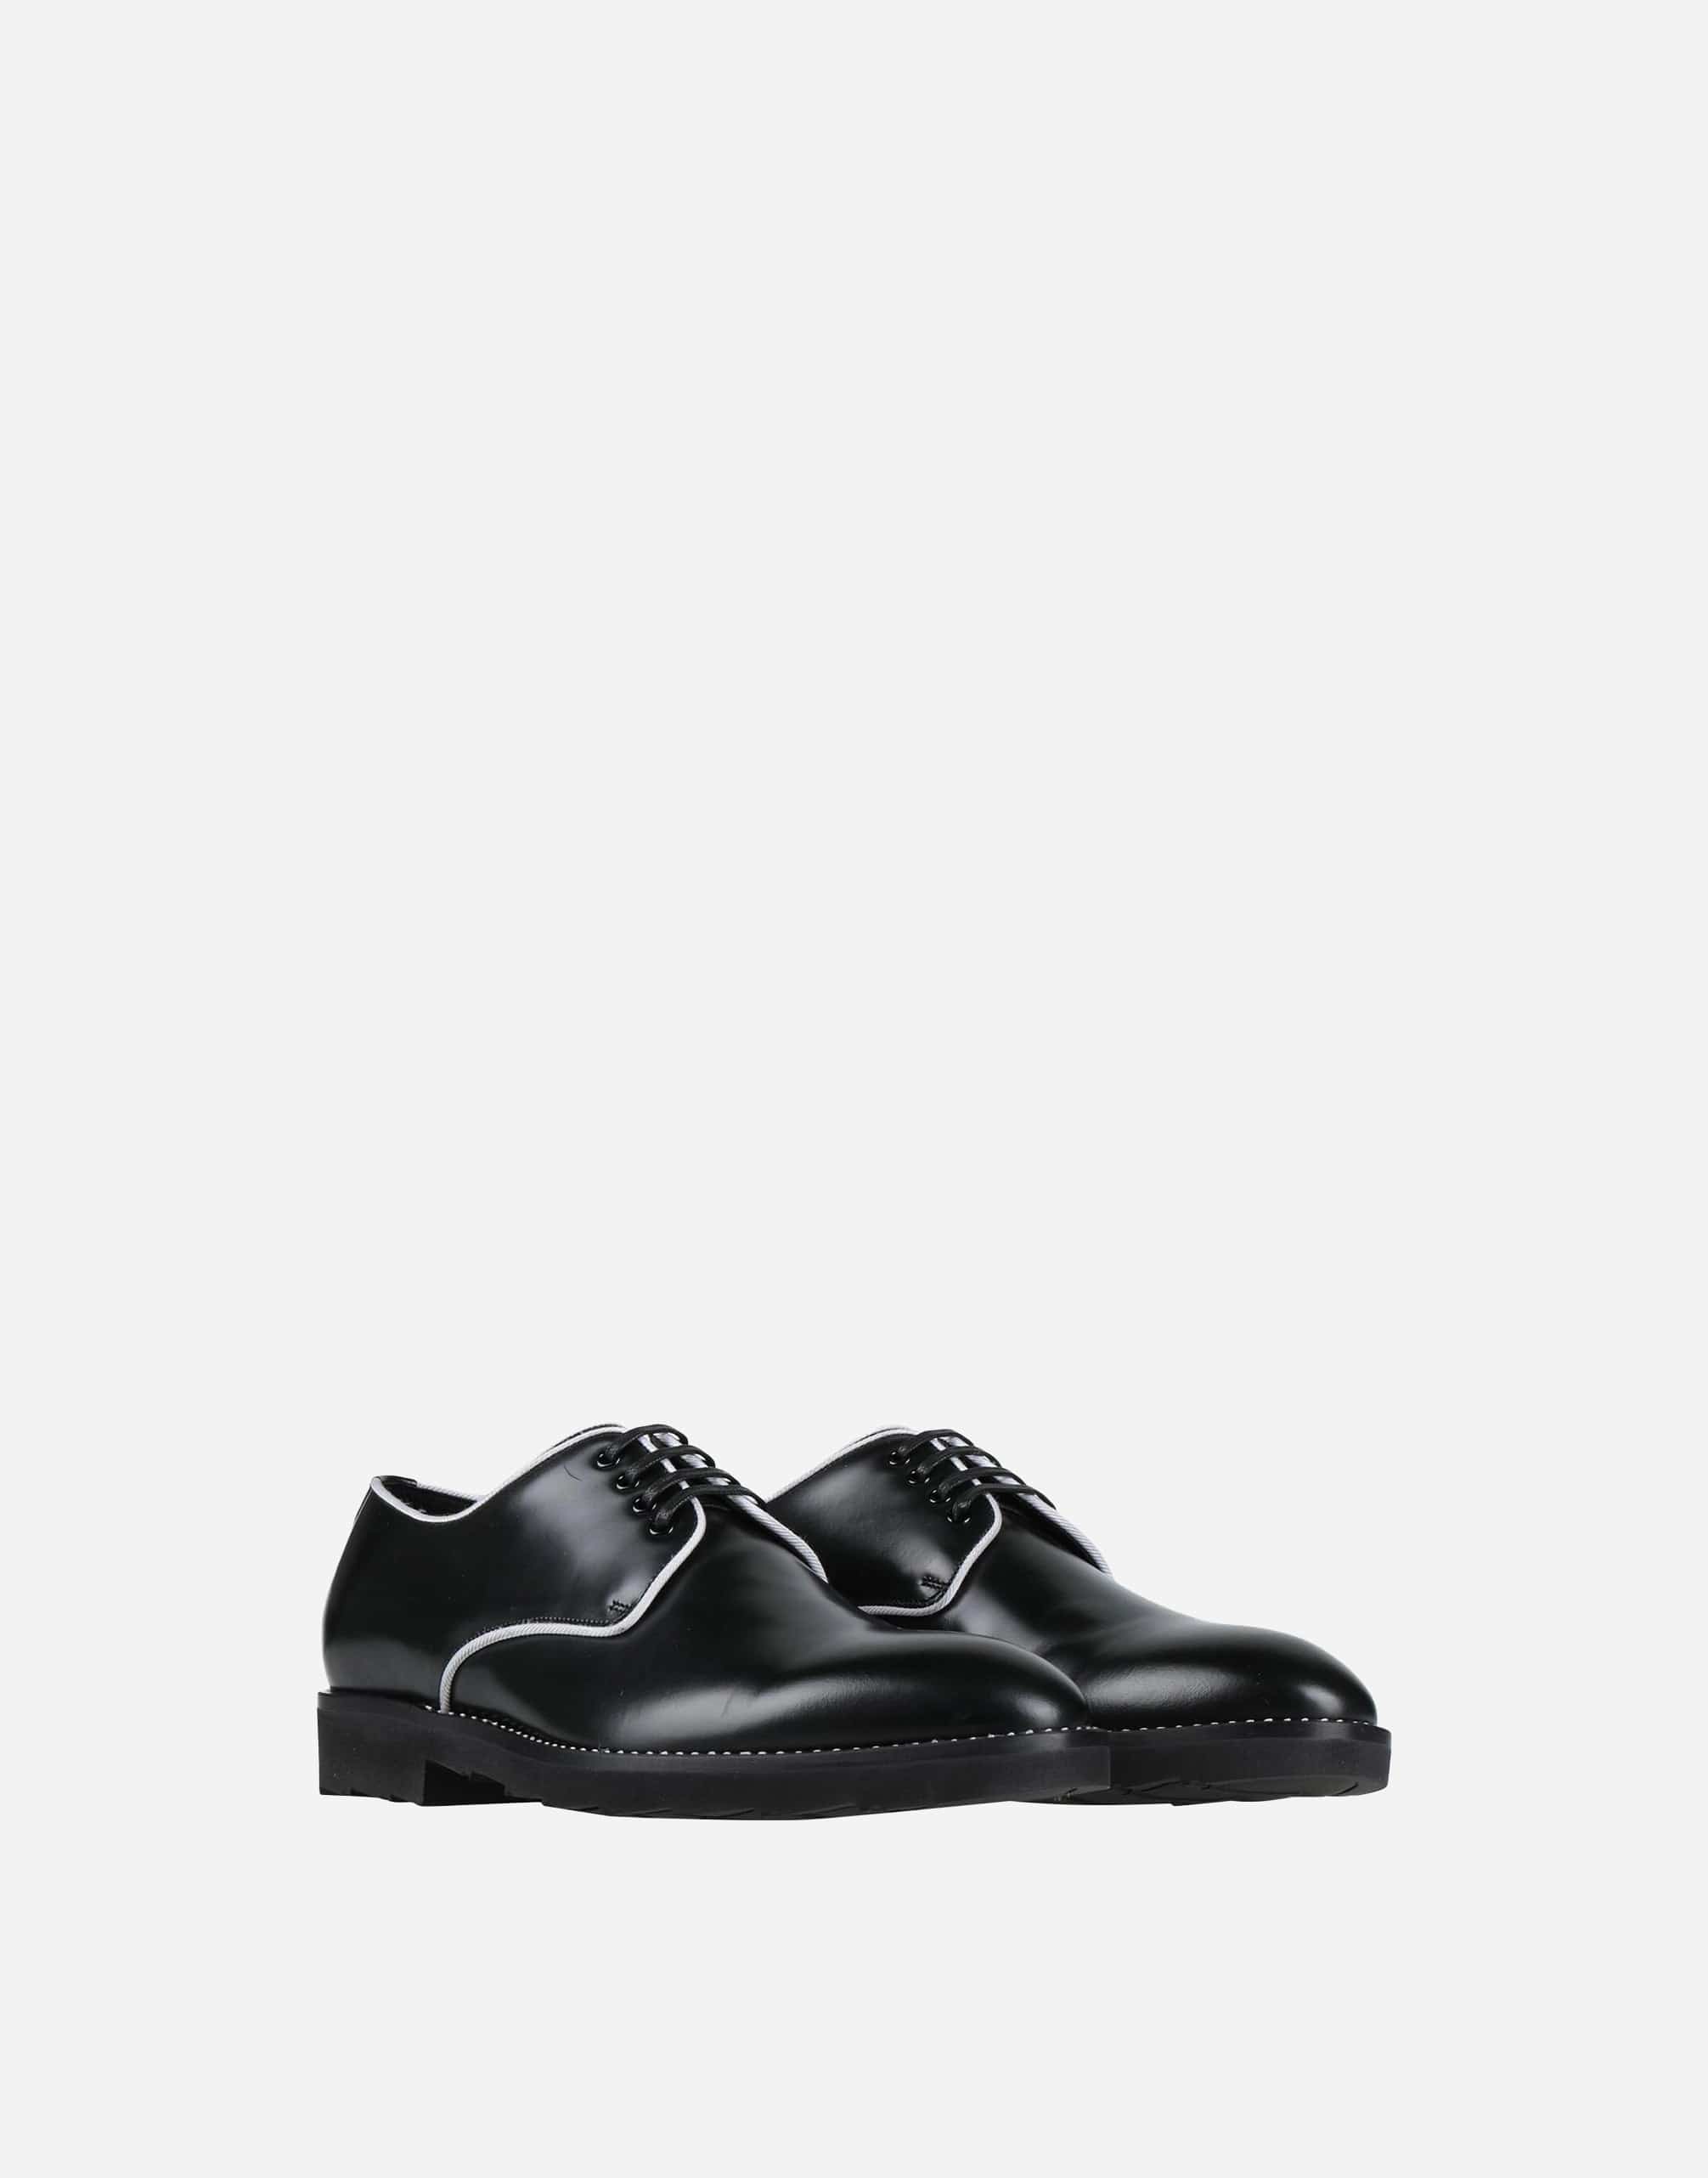 Dolce & Gabbana Black White Leather Formal Shoes